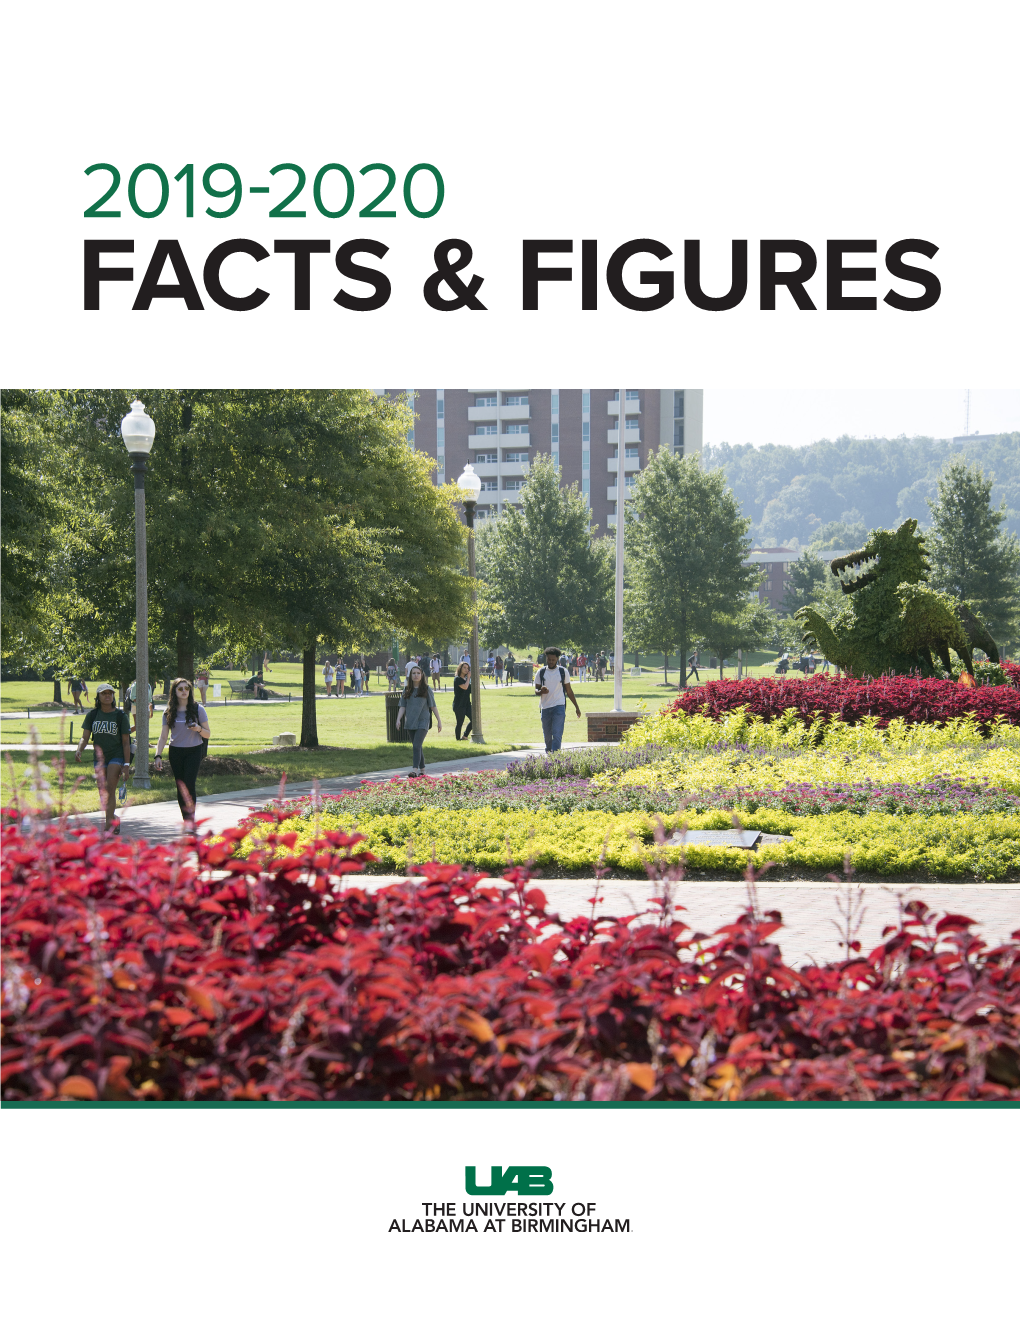 2019-2020 FACTS & FIGURES FACTS & FIGURES 2019-2020 40Th Edition | June 2020